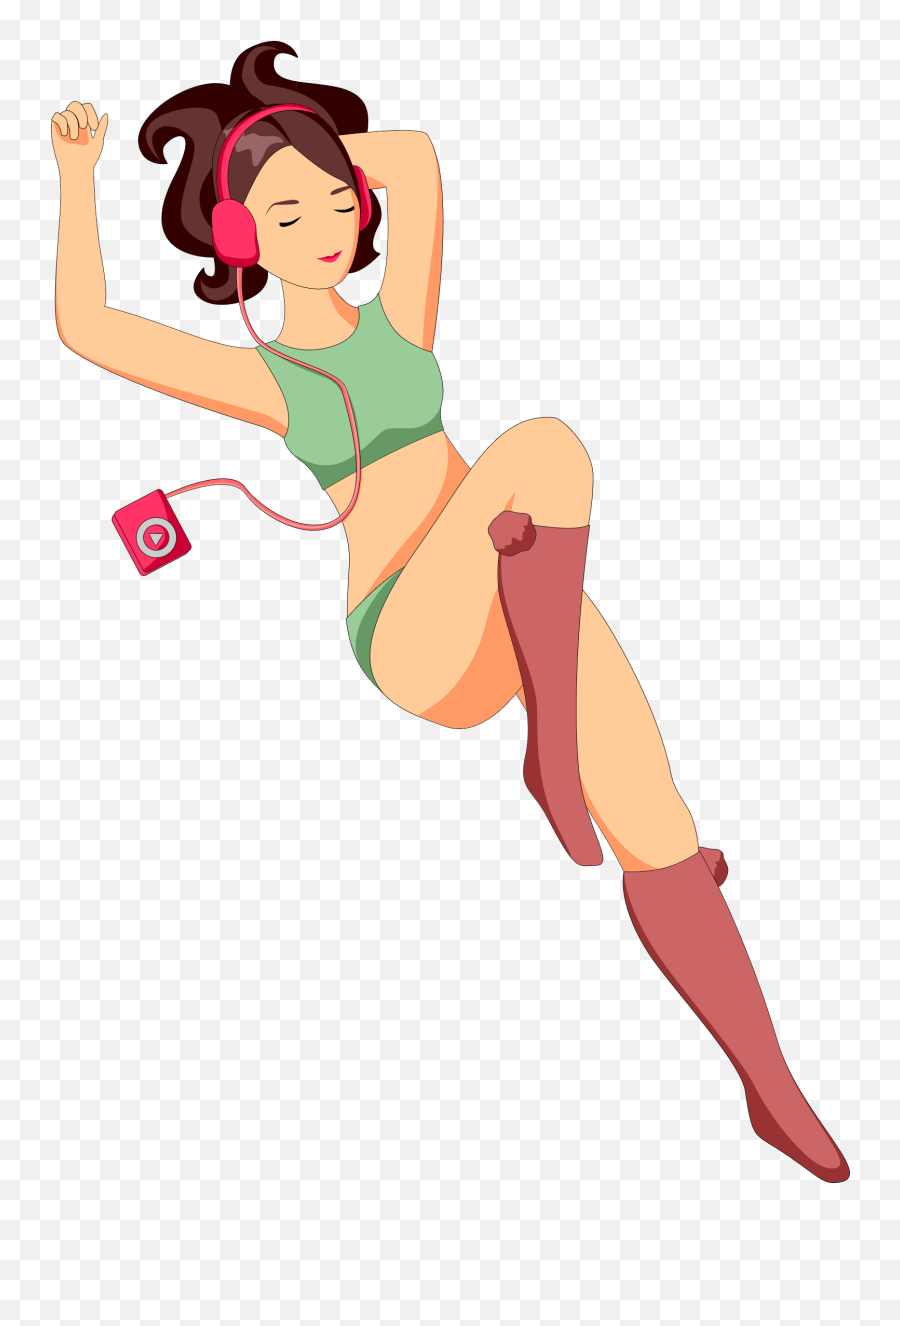 Music Listen Relax Girl Drawing Free Image Download Emoji,Listen To Music Clipart